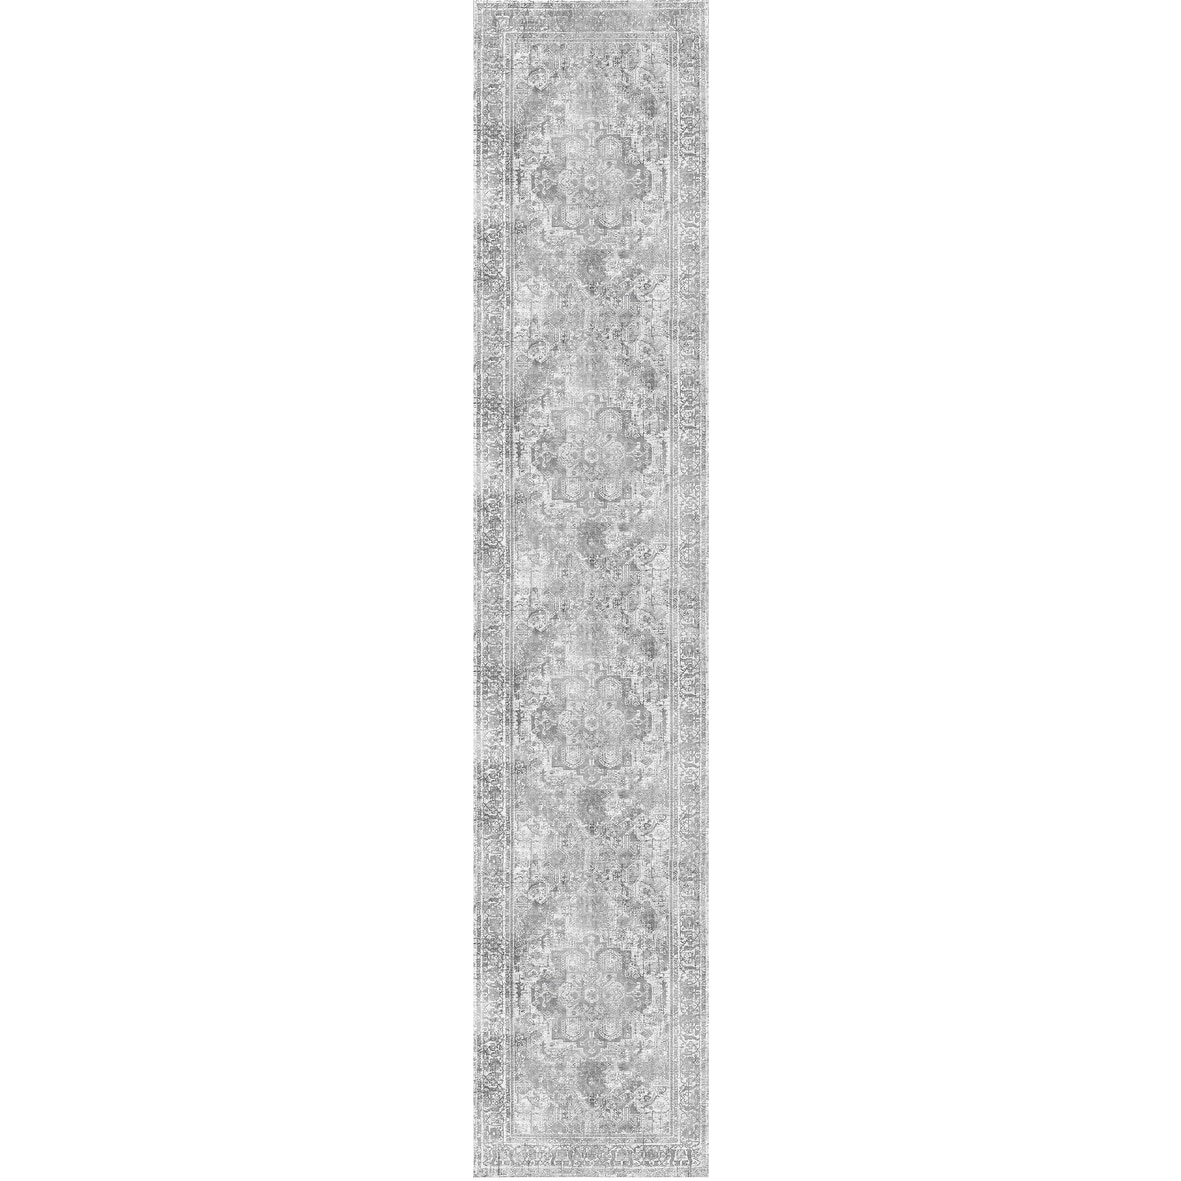 https://ak1.ostkcdn.com/images/products/is/images/direct/98a72f06959fd3aa2b54432e342479d89cd795a5/The-Rug-Collective-Distressed-Vintage-Chilaz-Grey-Rug-Machine-Washable-Area-Rug.jpg